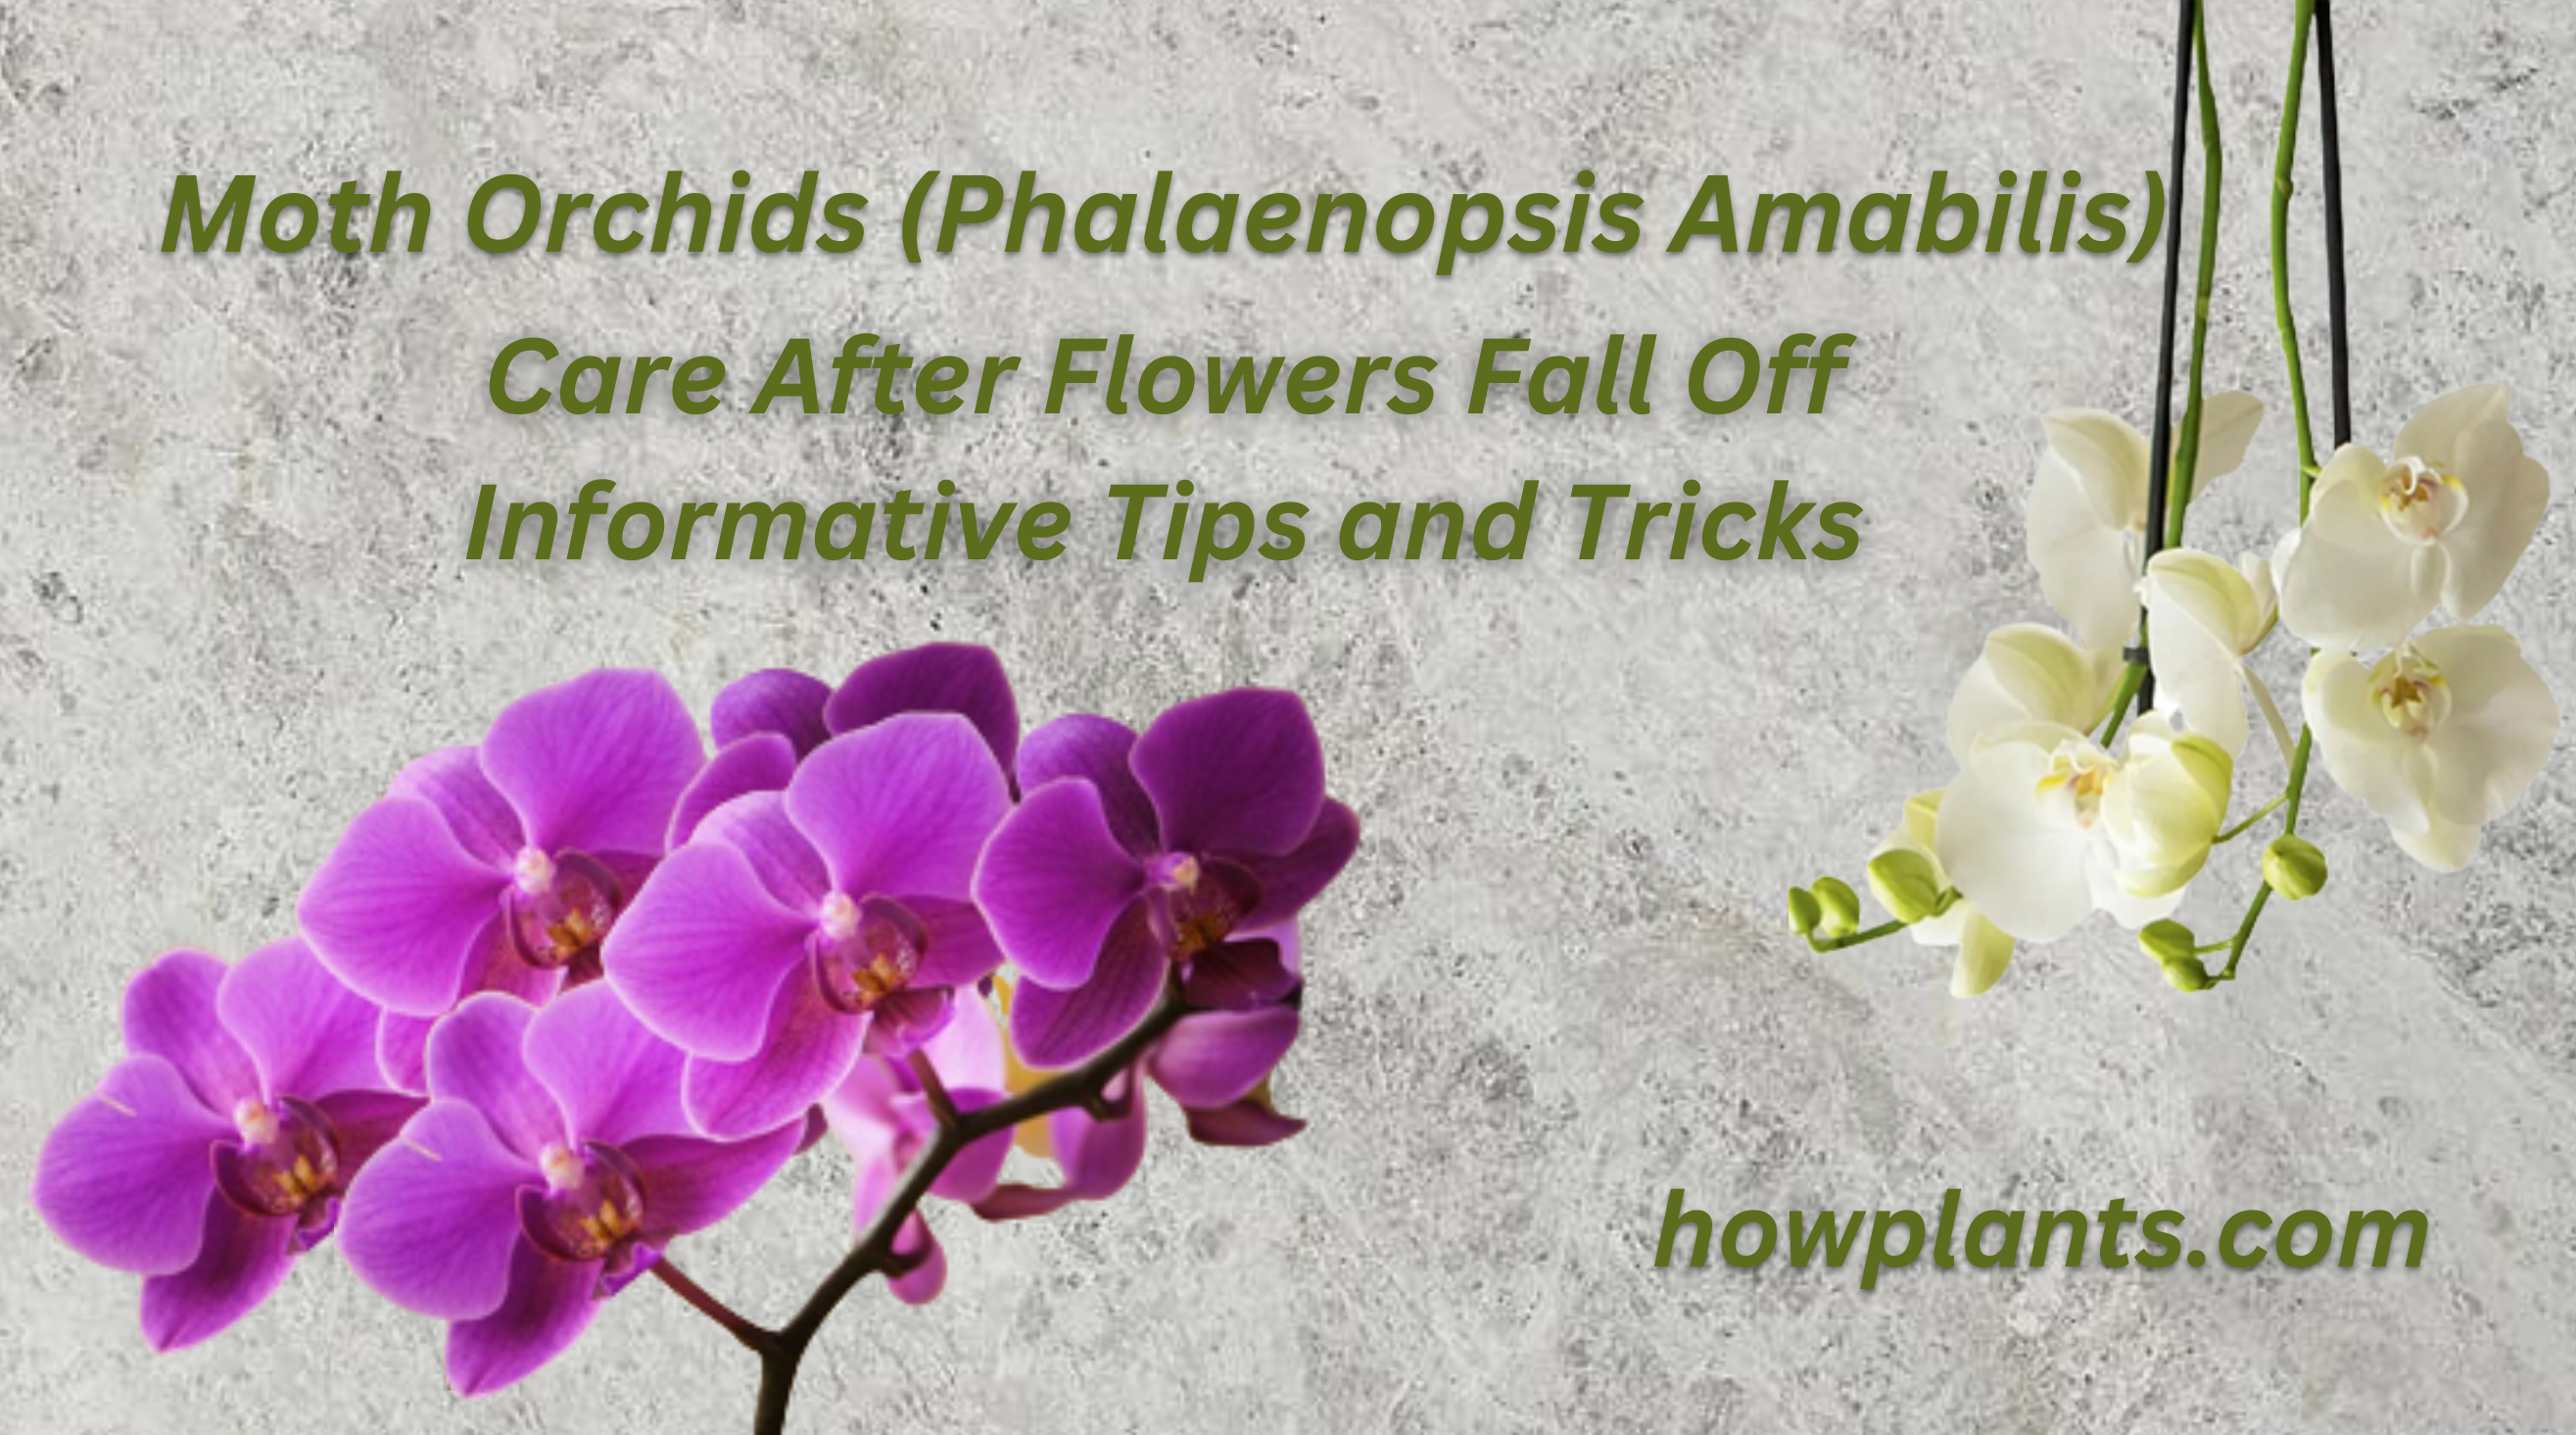 Moth Orchids (Phalaenopsis Amabilis) Care After Flowers Fall Off Informative Tips and Tricks